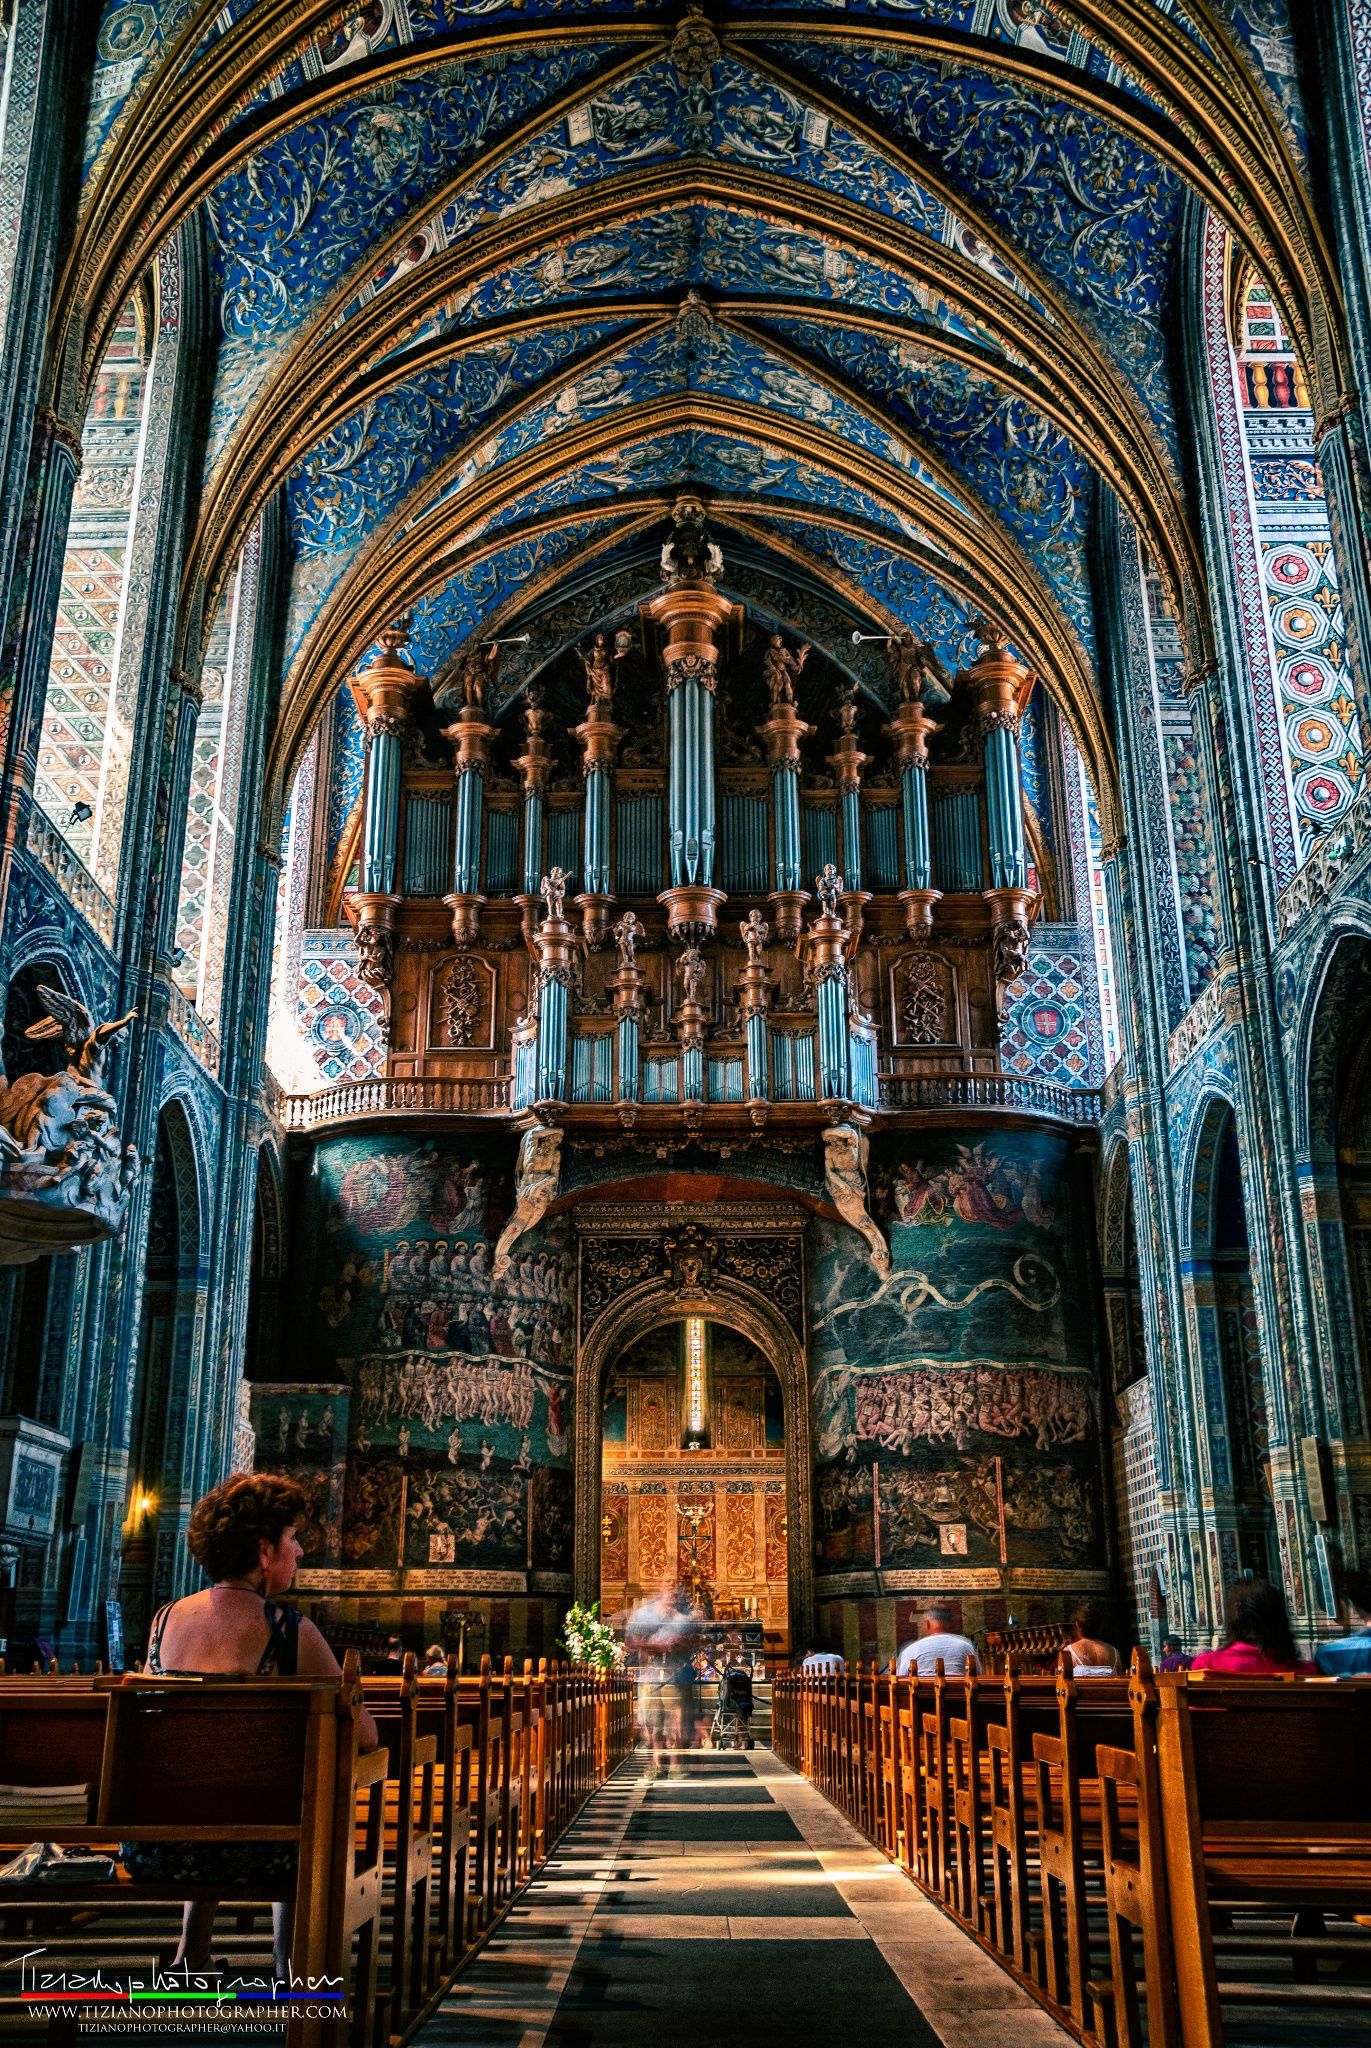 St Cecilia Cathedral Albi France by Tiziano Valeno on 500px ...